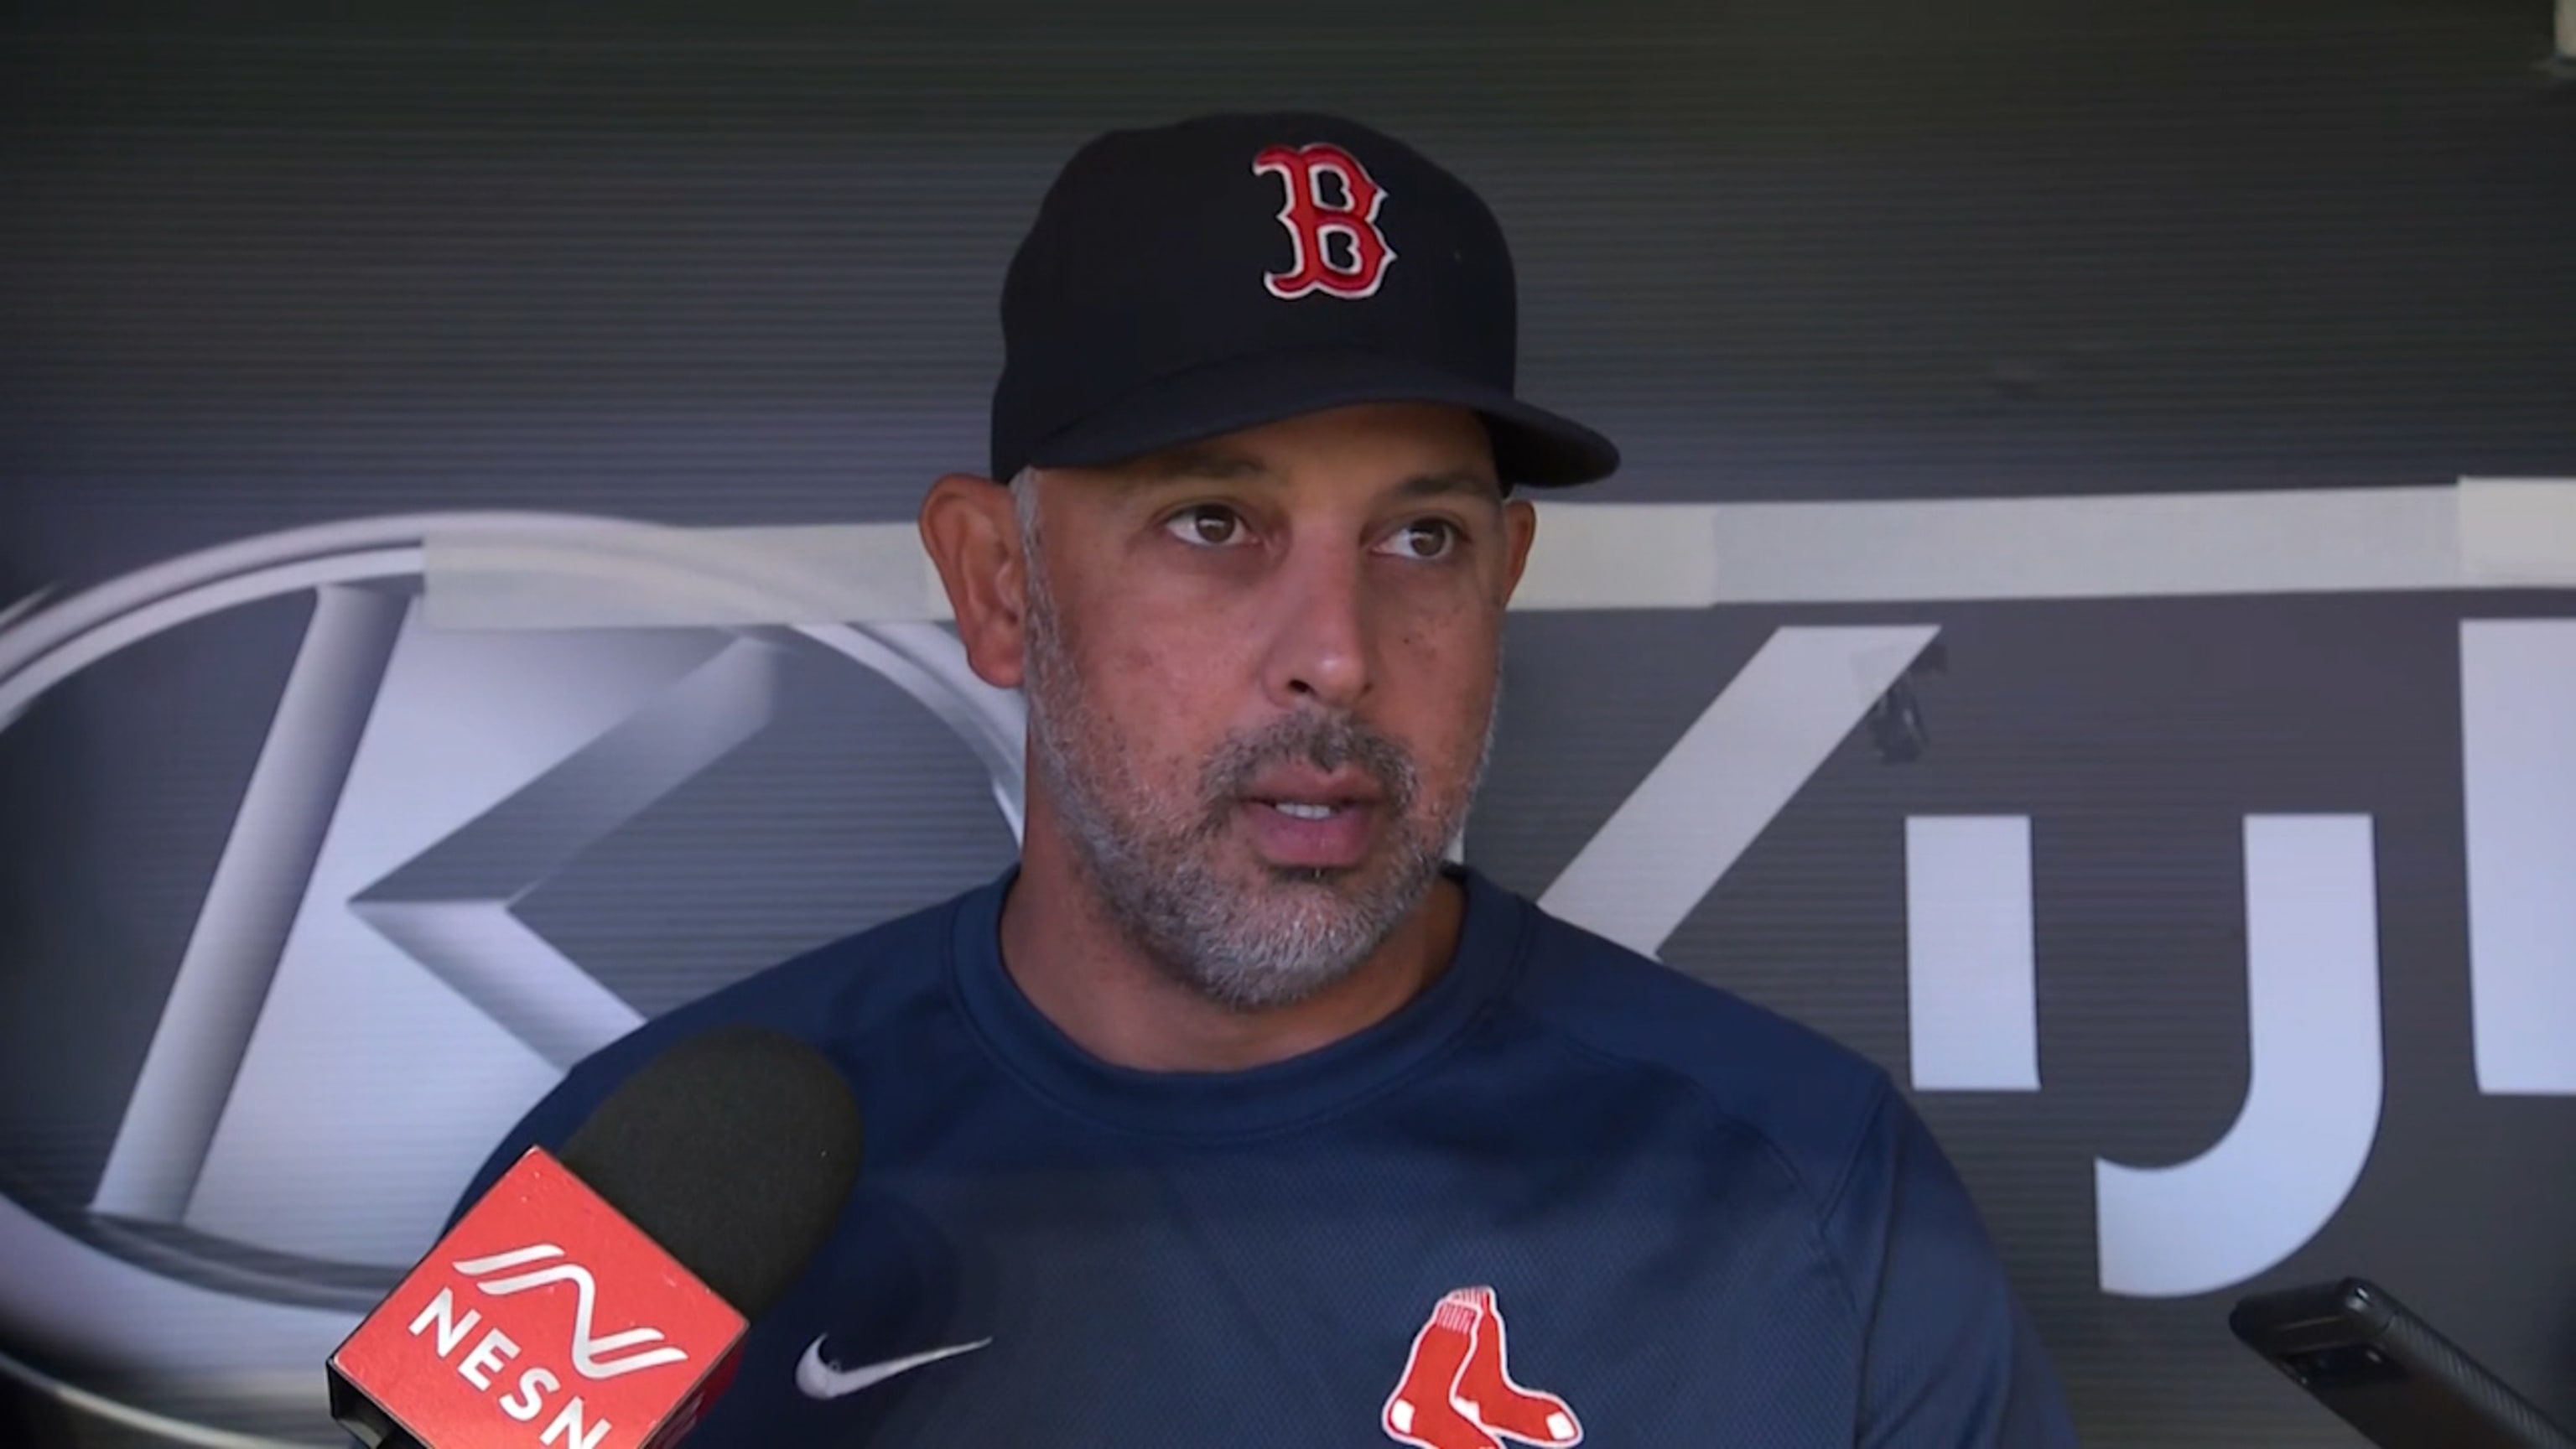 Alex Cora's Thoughts On Red Sox Decision To Fire Chaim Bloom